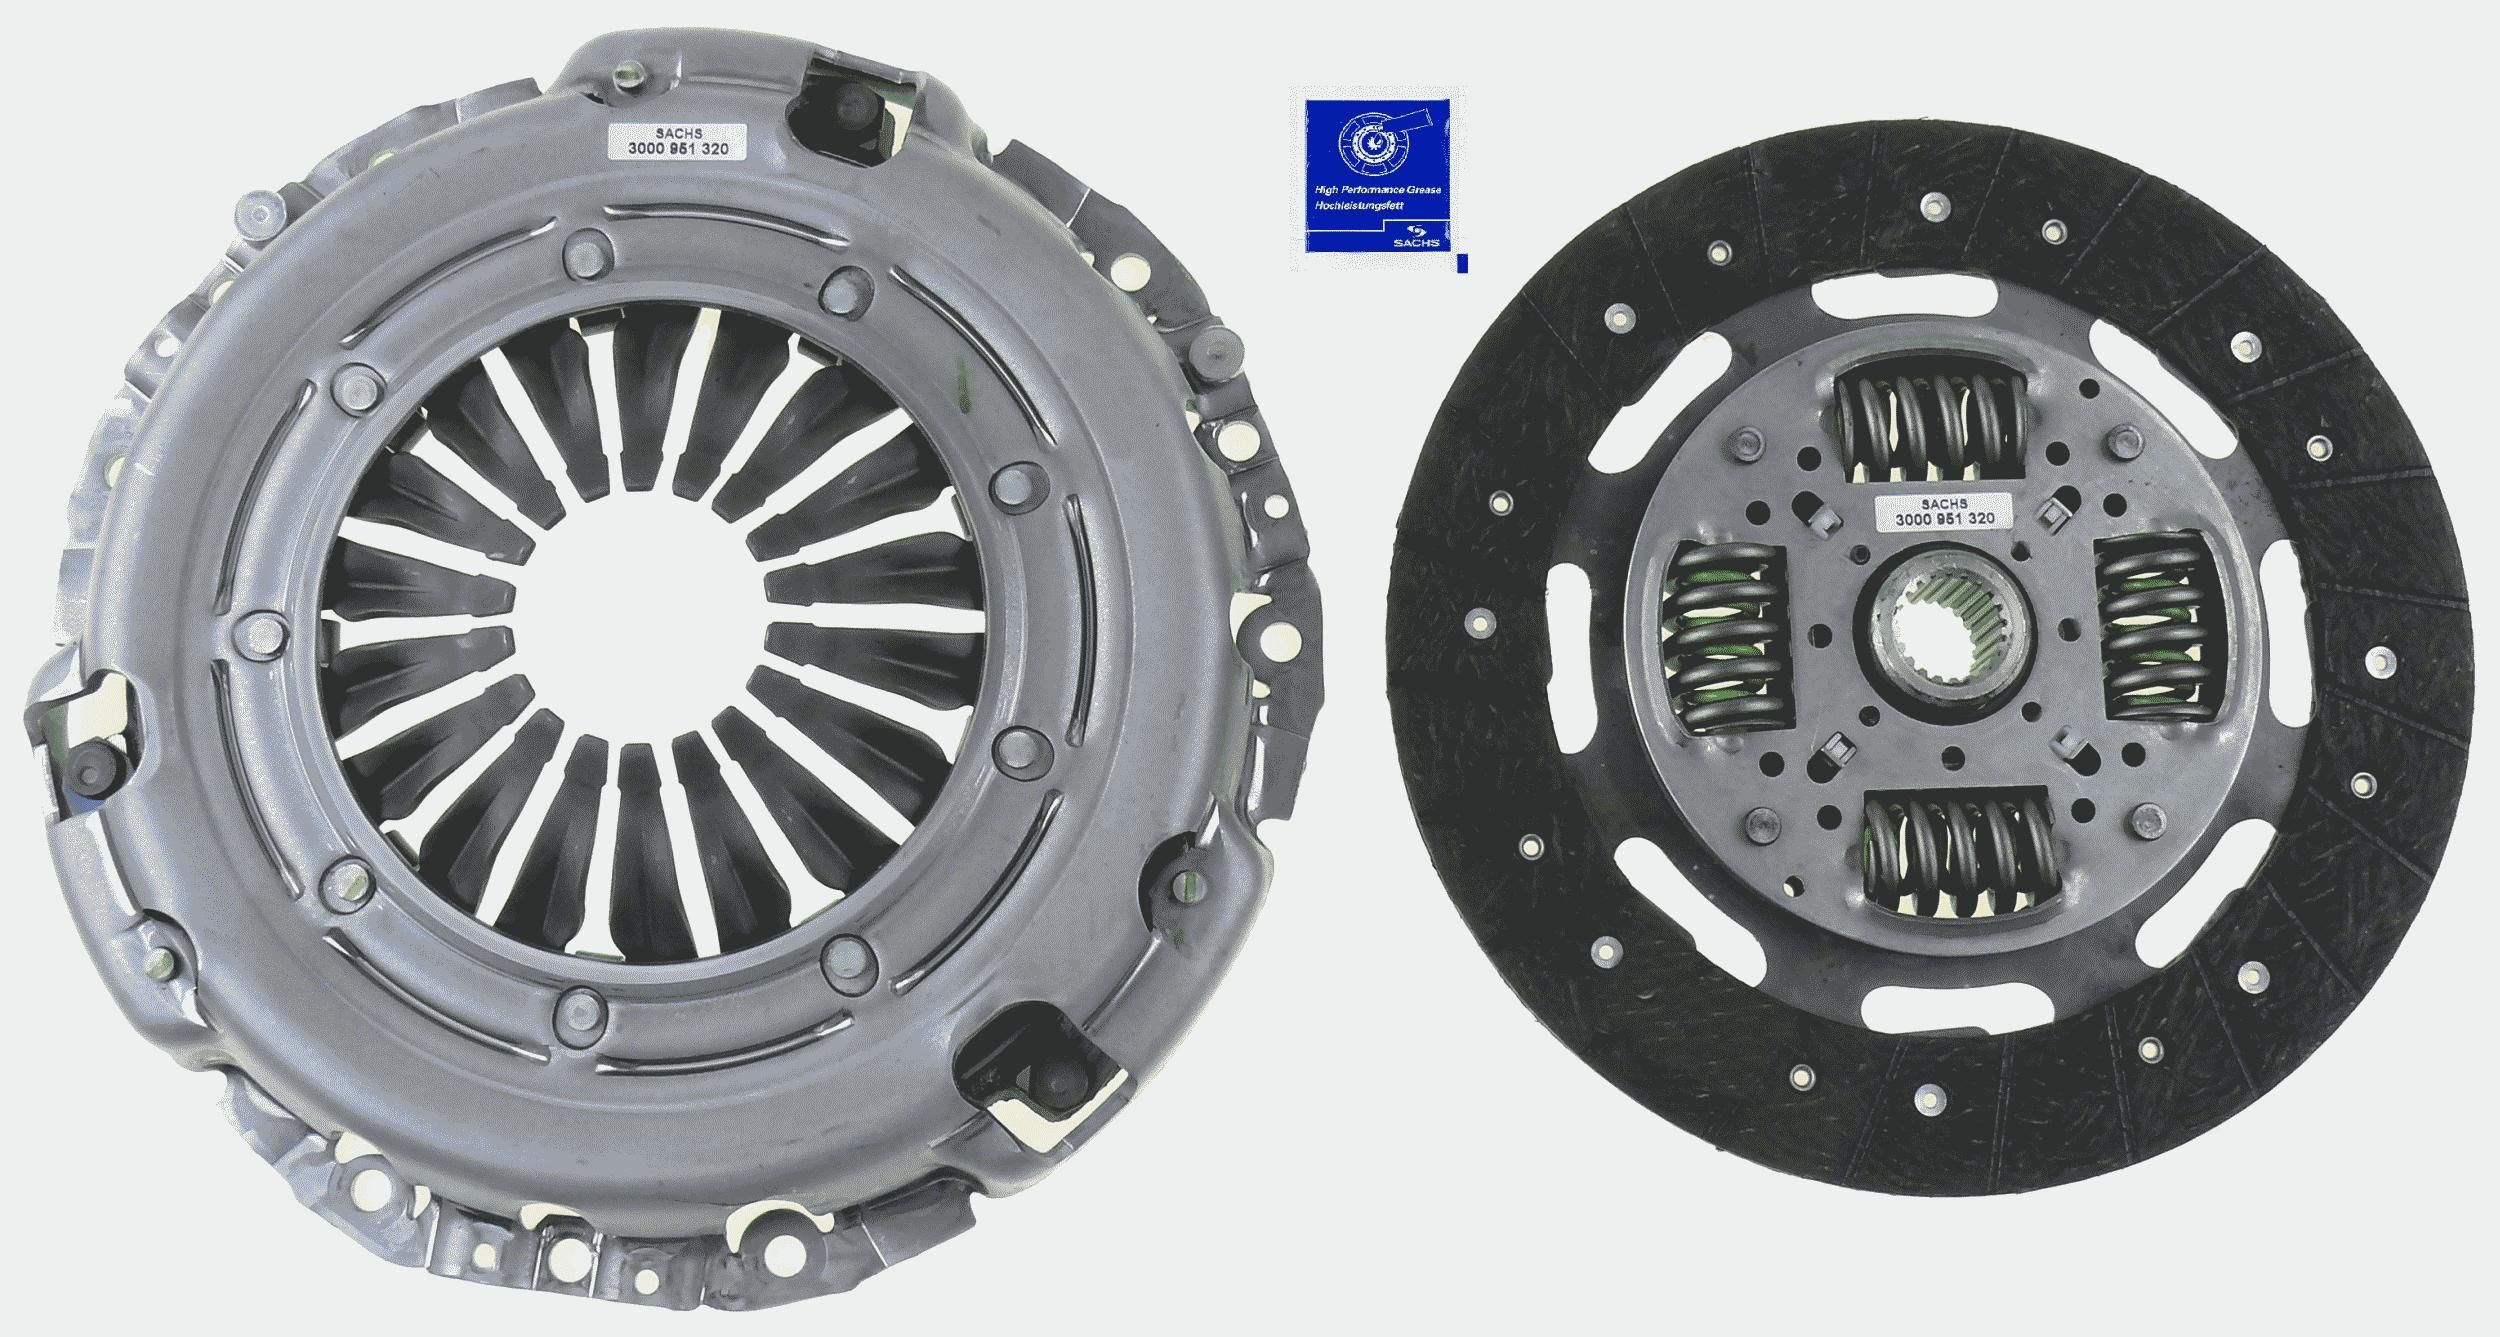 Great value for money - SACHS Clutch kit 3000 951 320